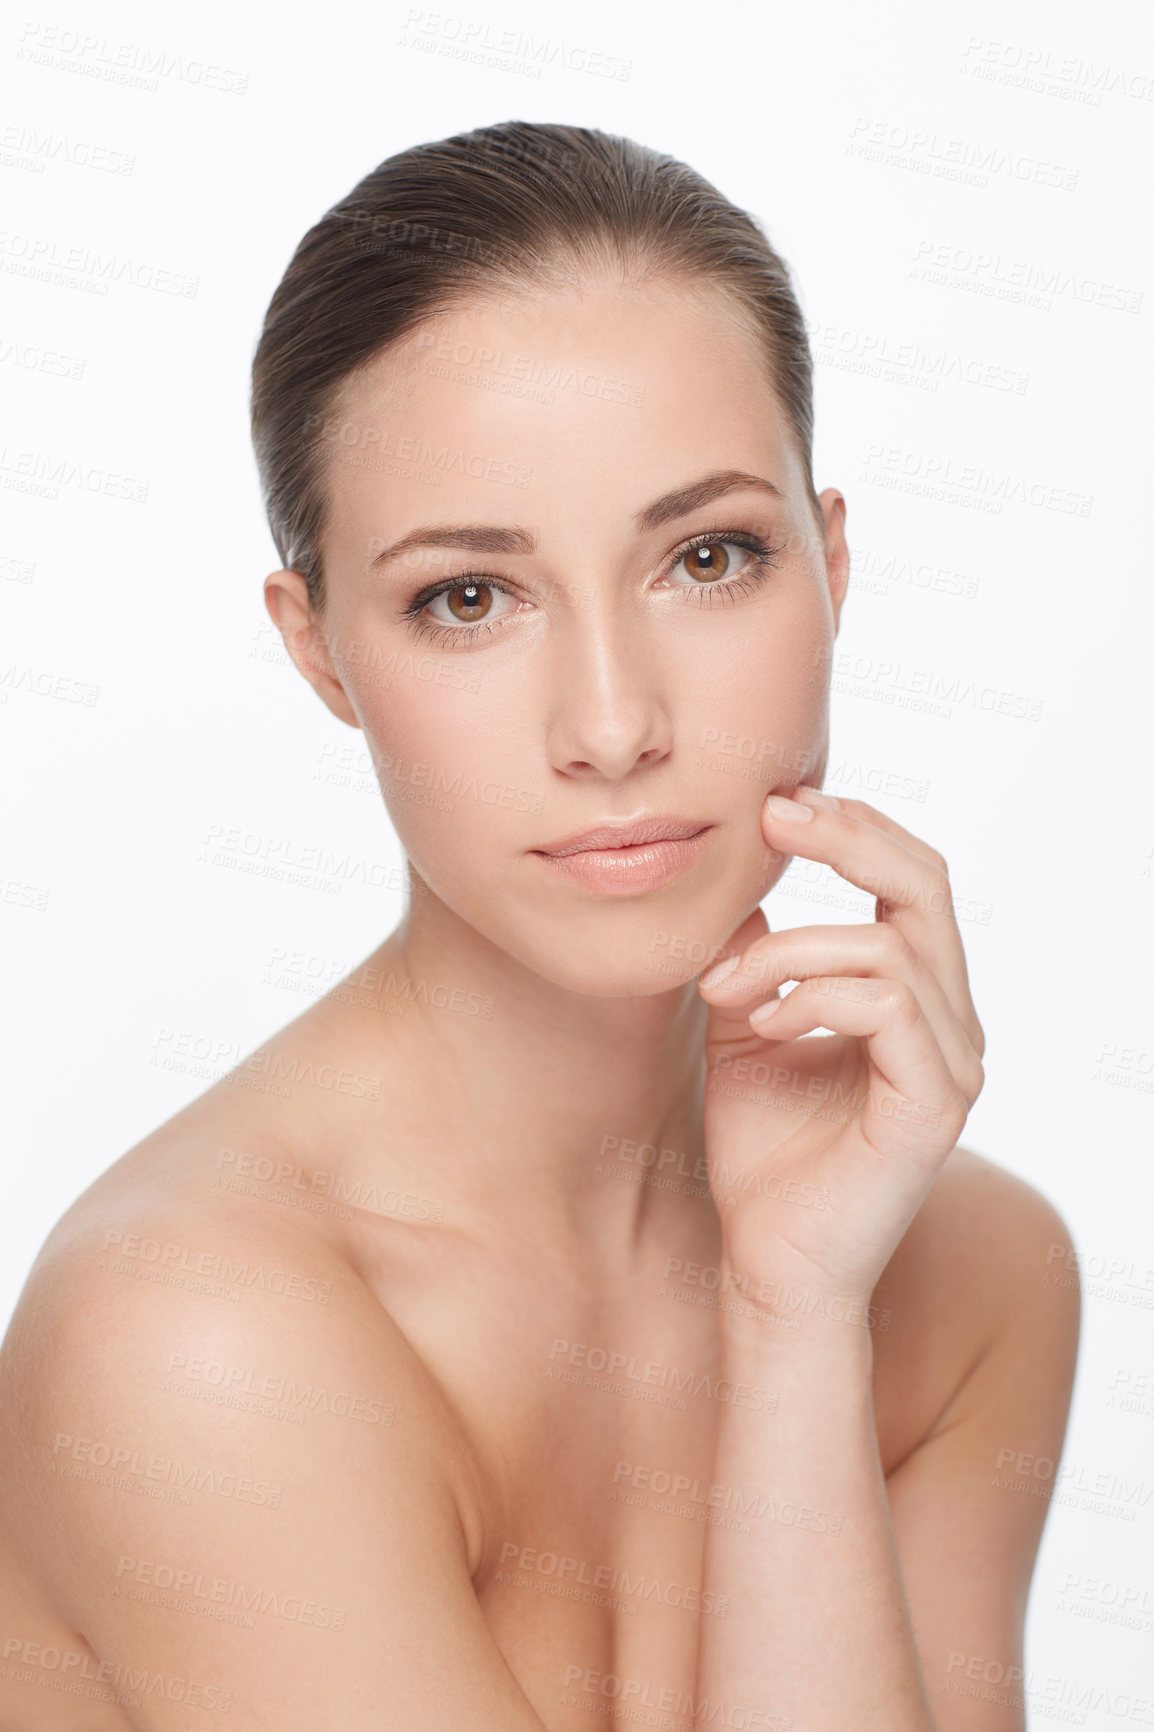 Buy stock photo Cropped portrait of a nude young woman with flawless skin against a white background